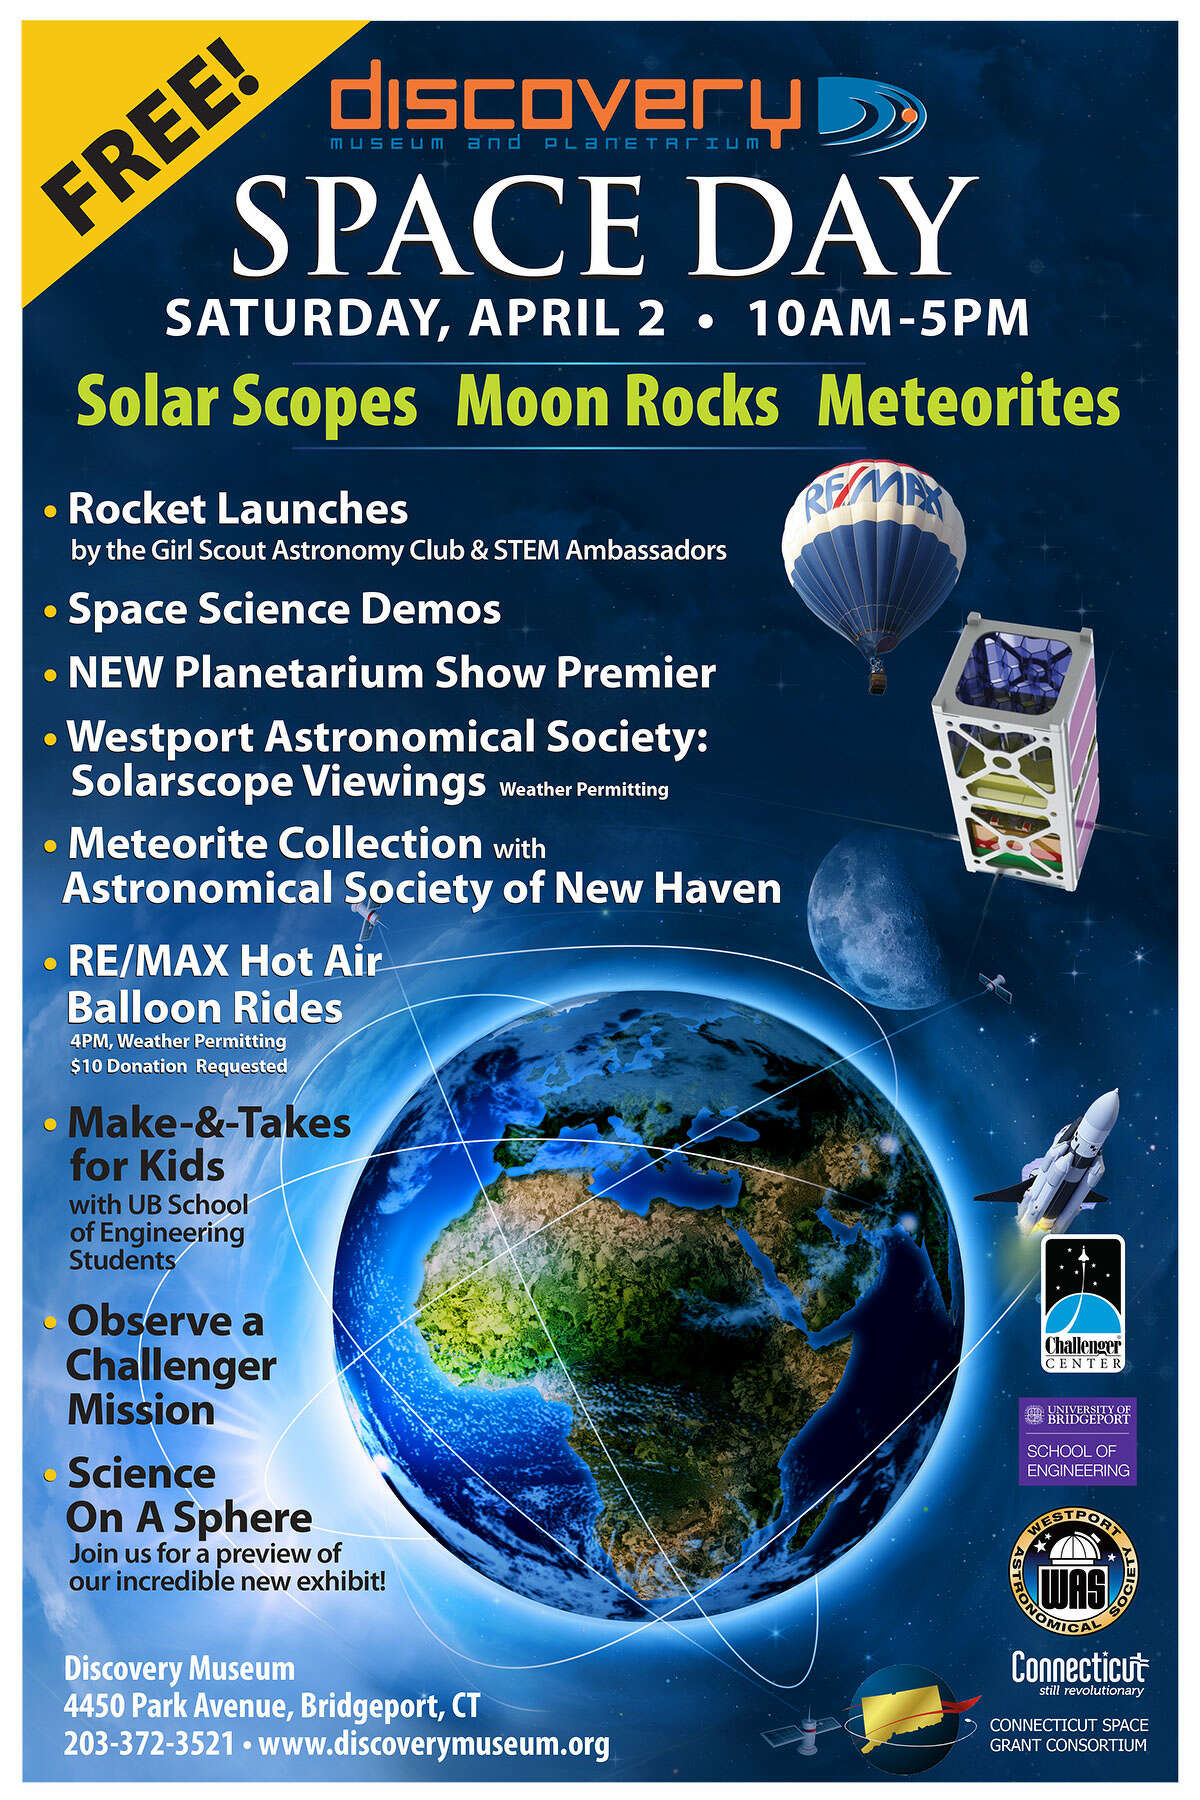 The poster for the space event on Saturday, April 2, 2016, at the Discovery Museum in Bridgeport, Connecticut.